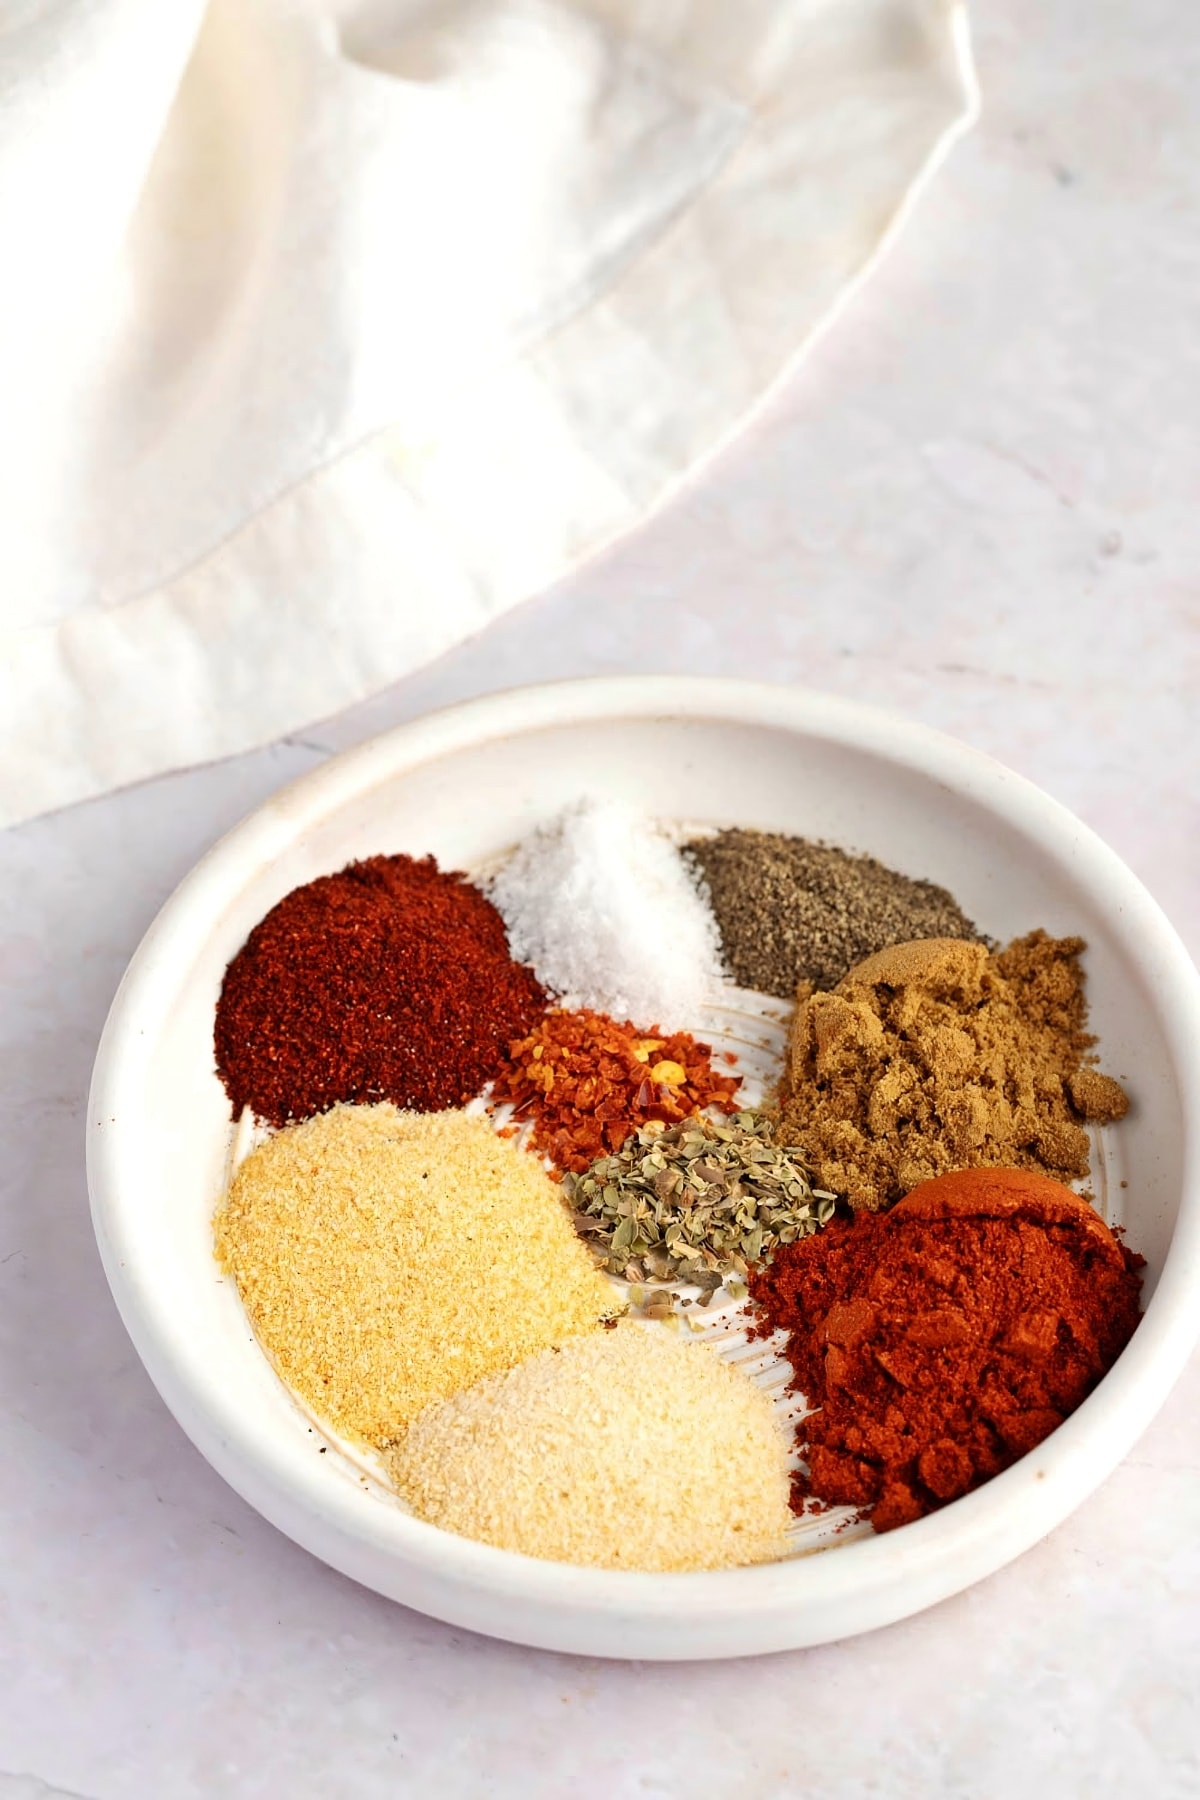 Mexican Seasoning Ingredients - Chili, Garlic and Onion Powder, Crushed Red Pepper Flakes, Dried Oregano, Paprika, Ground Cumin, Cinnamon and Ground Cloves